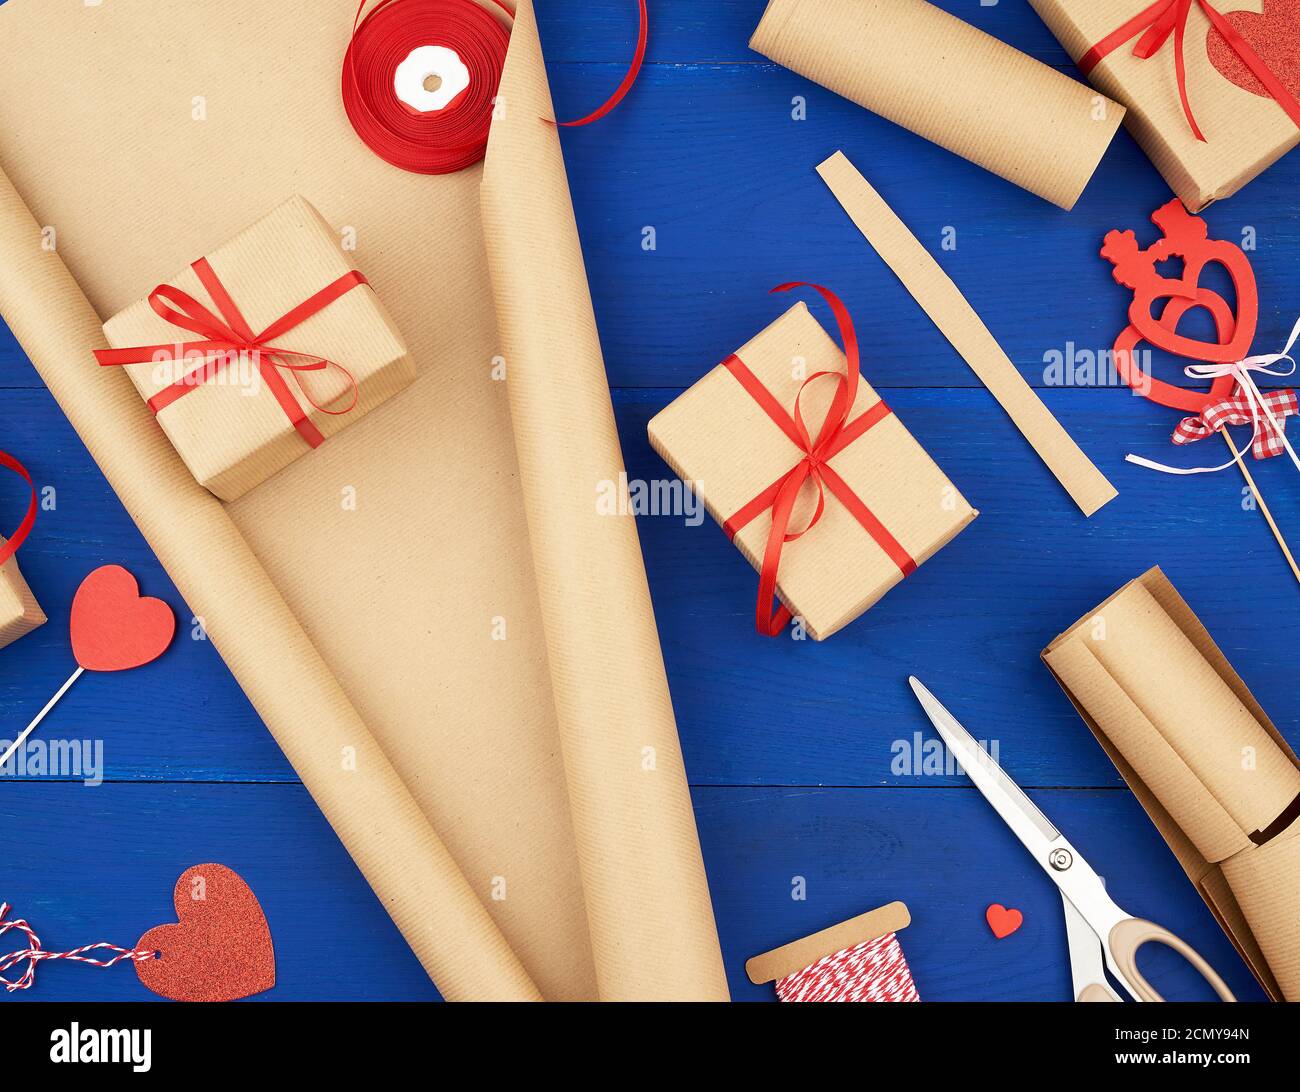 brown kraft paper, packed gift bags and tied with a red ribbon, red heart, set of items for making g Stock Photo